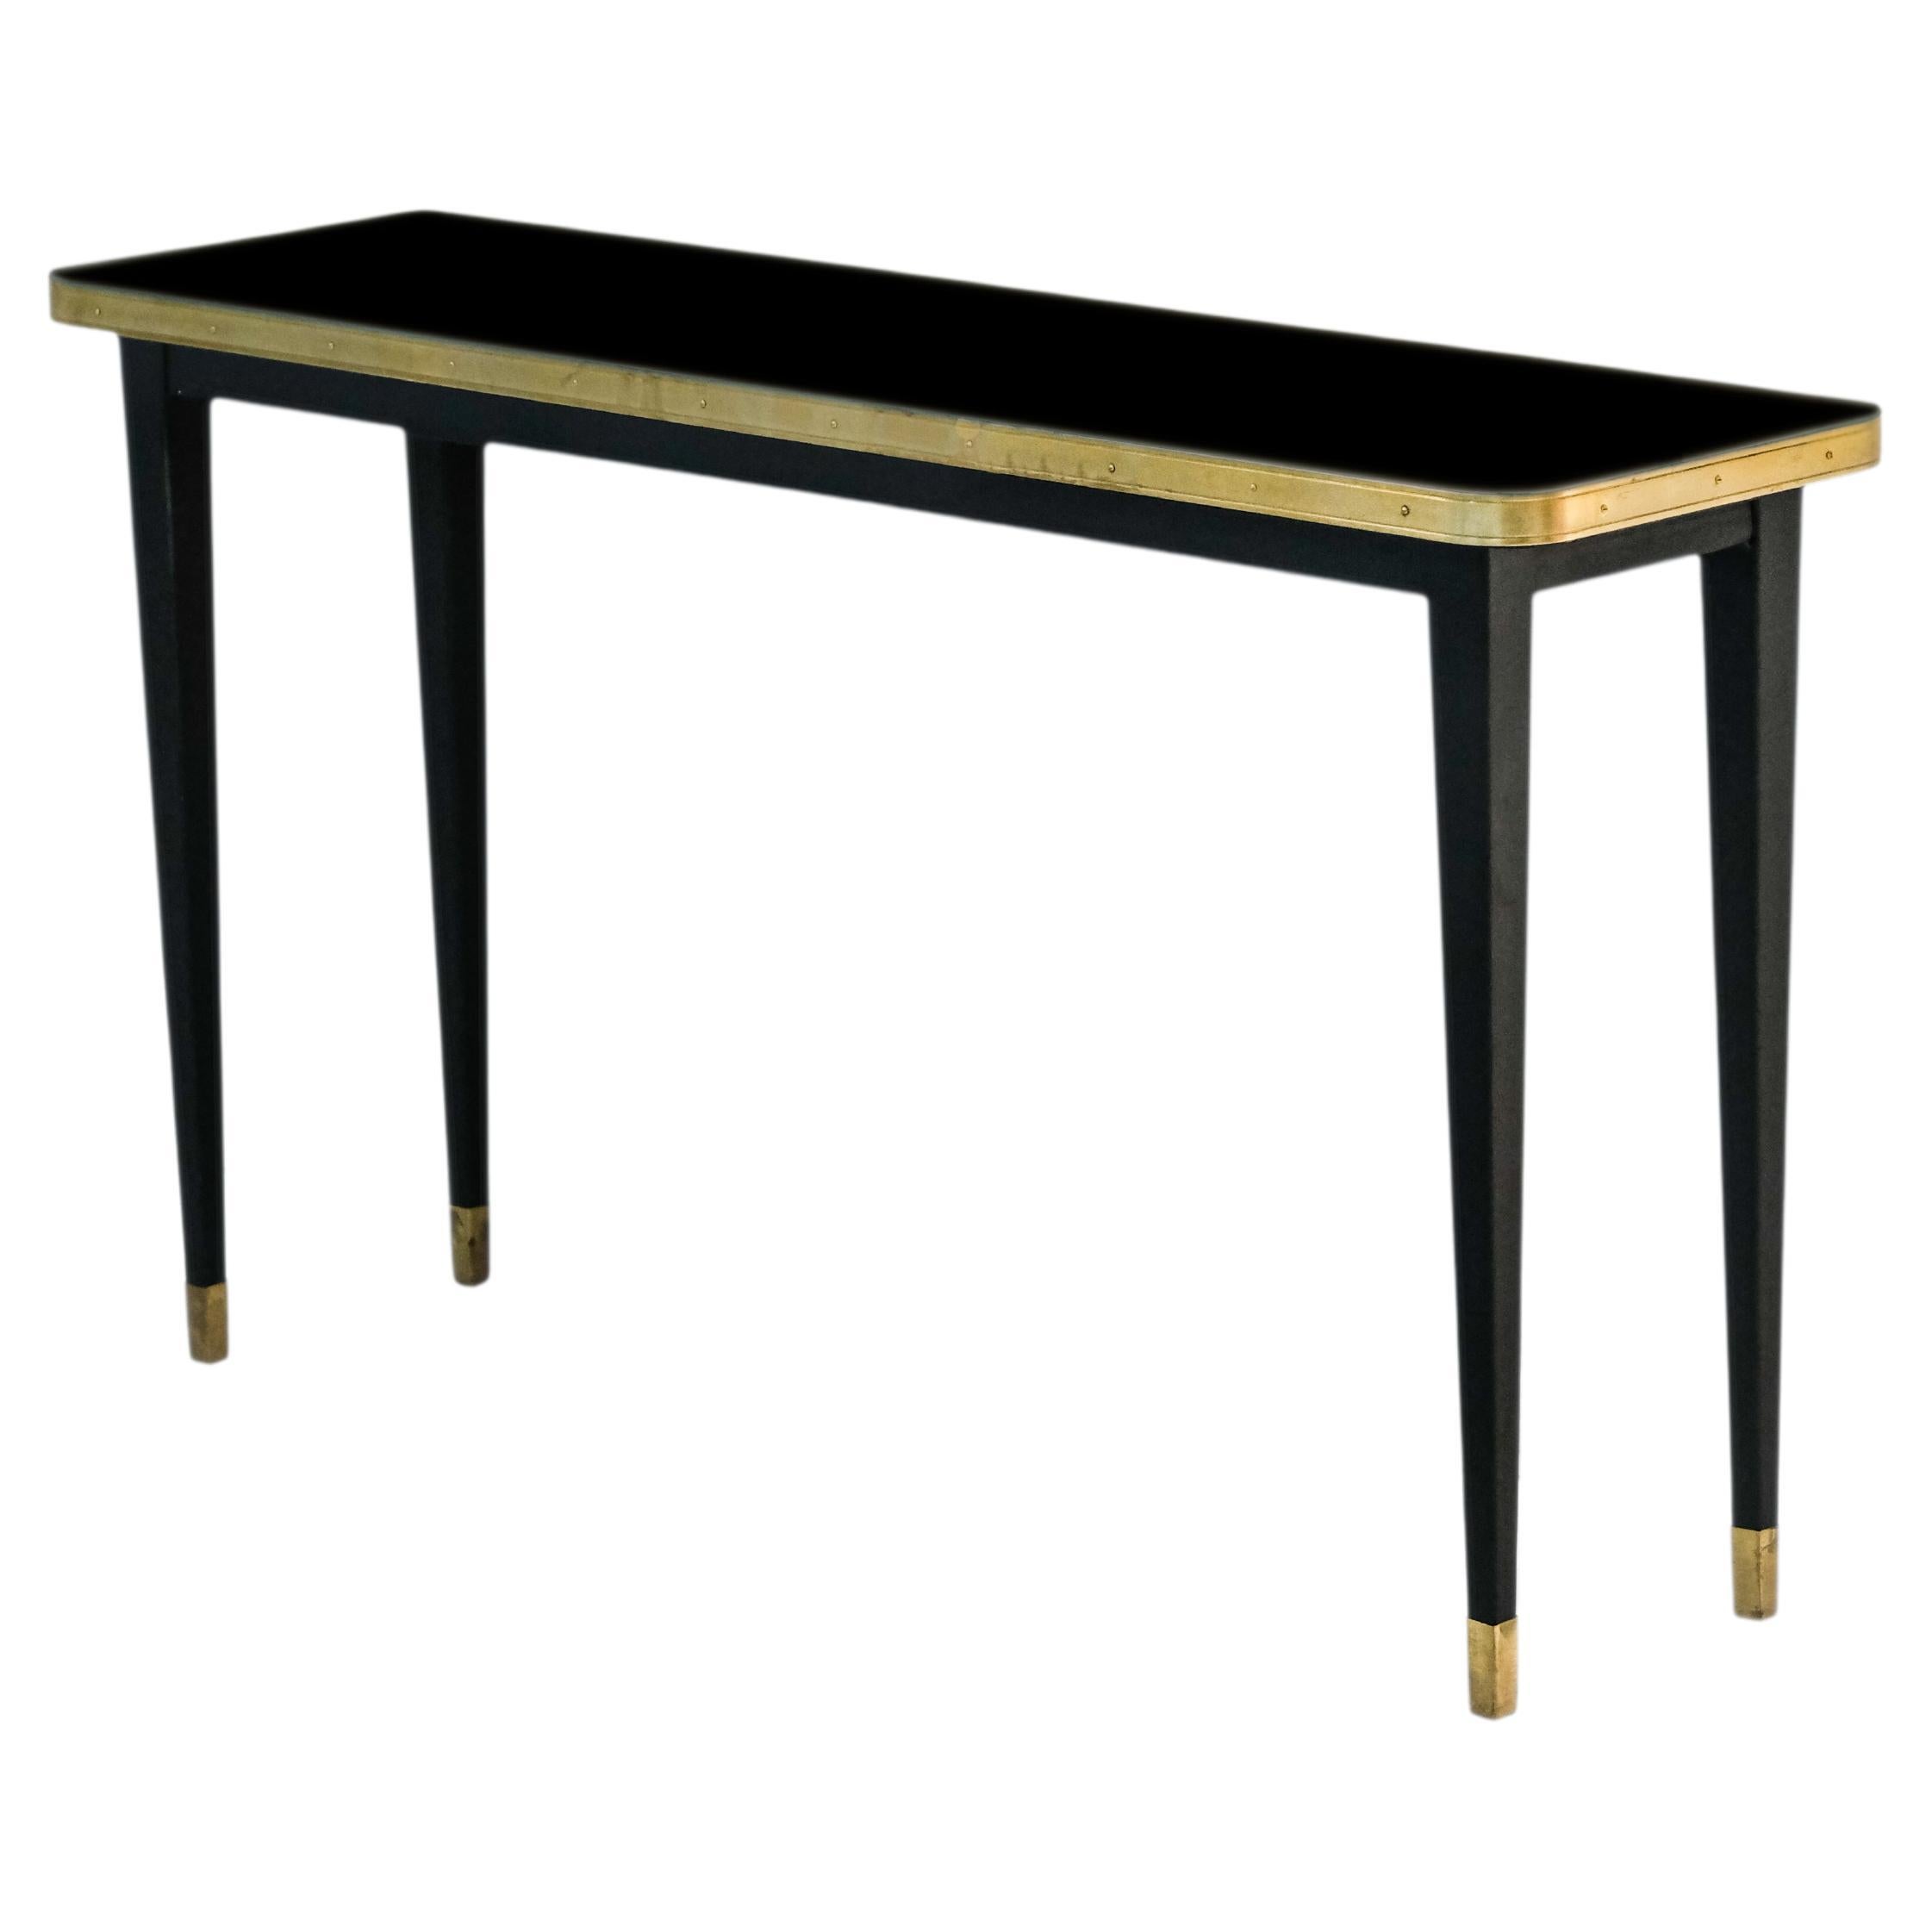 Console Table, High Gloss Laminate & Brass Details, Diamond Black - L For Sale